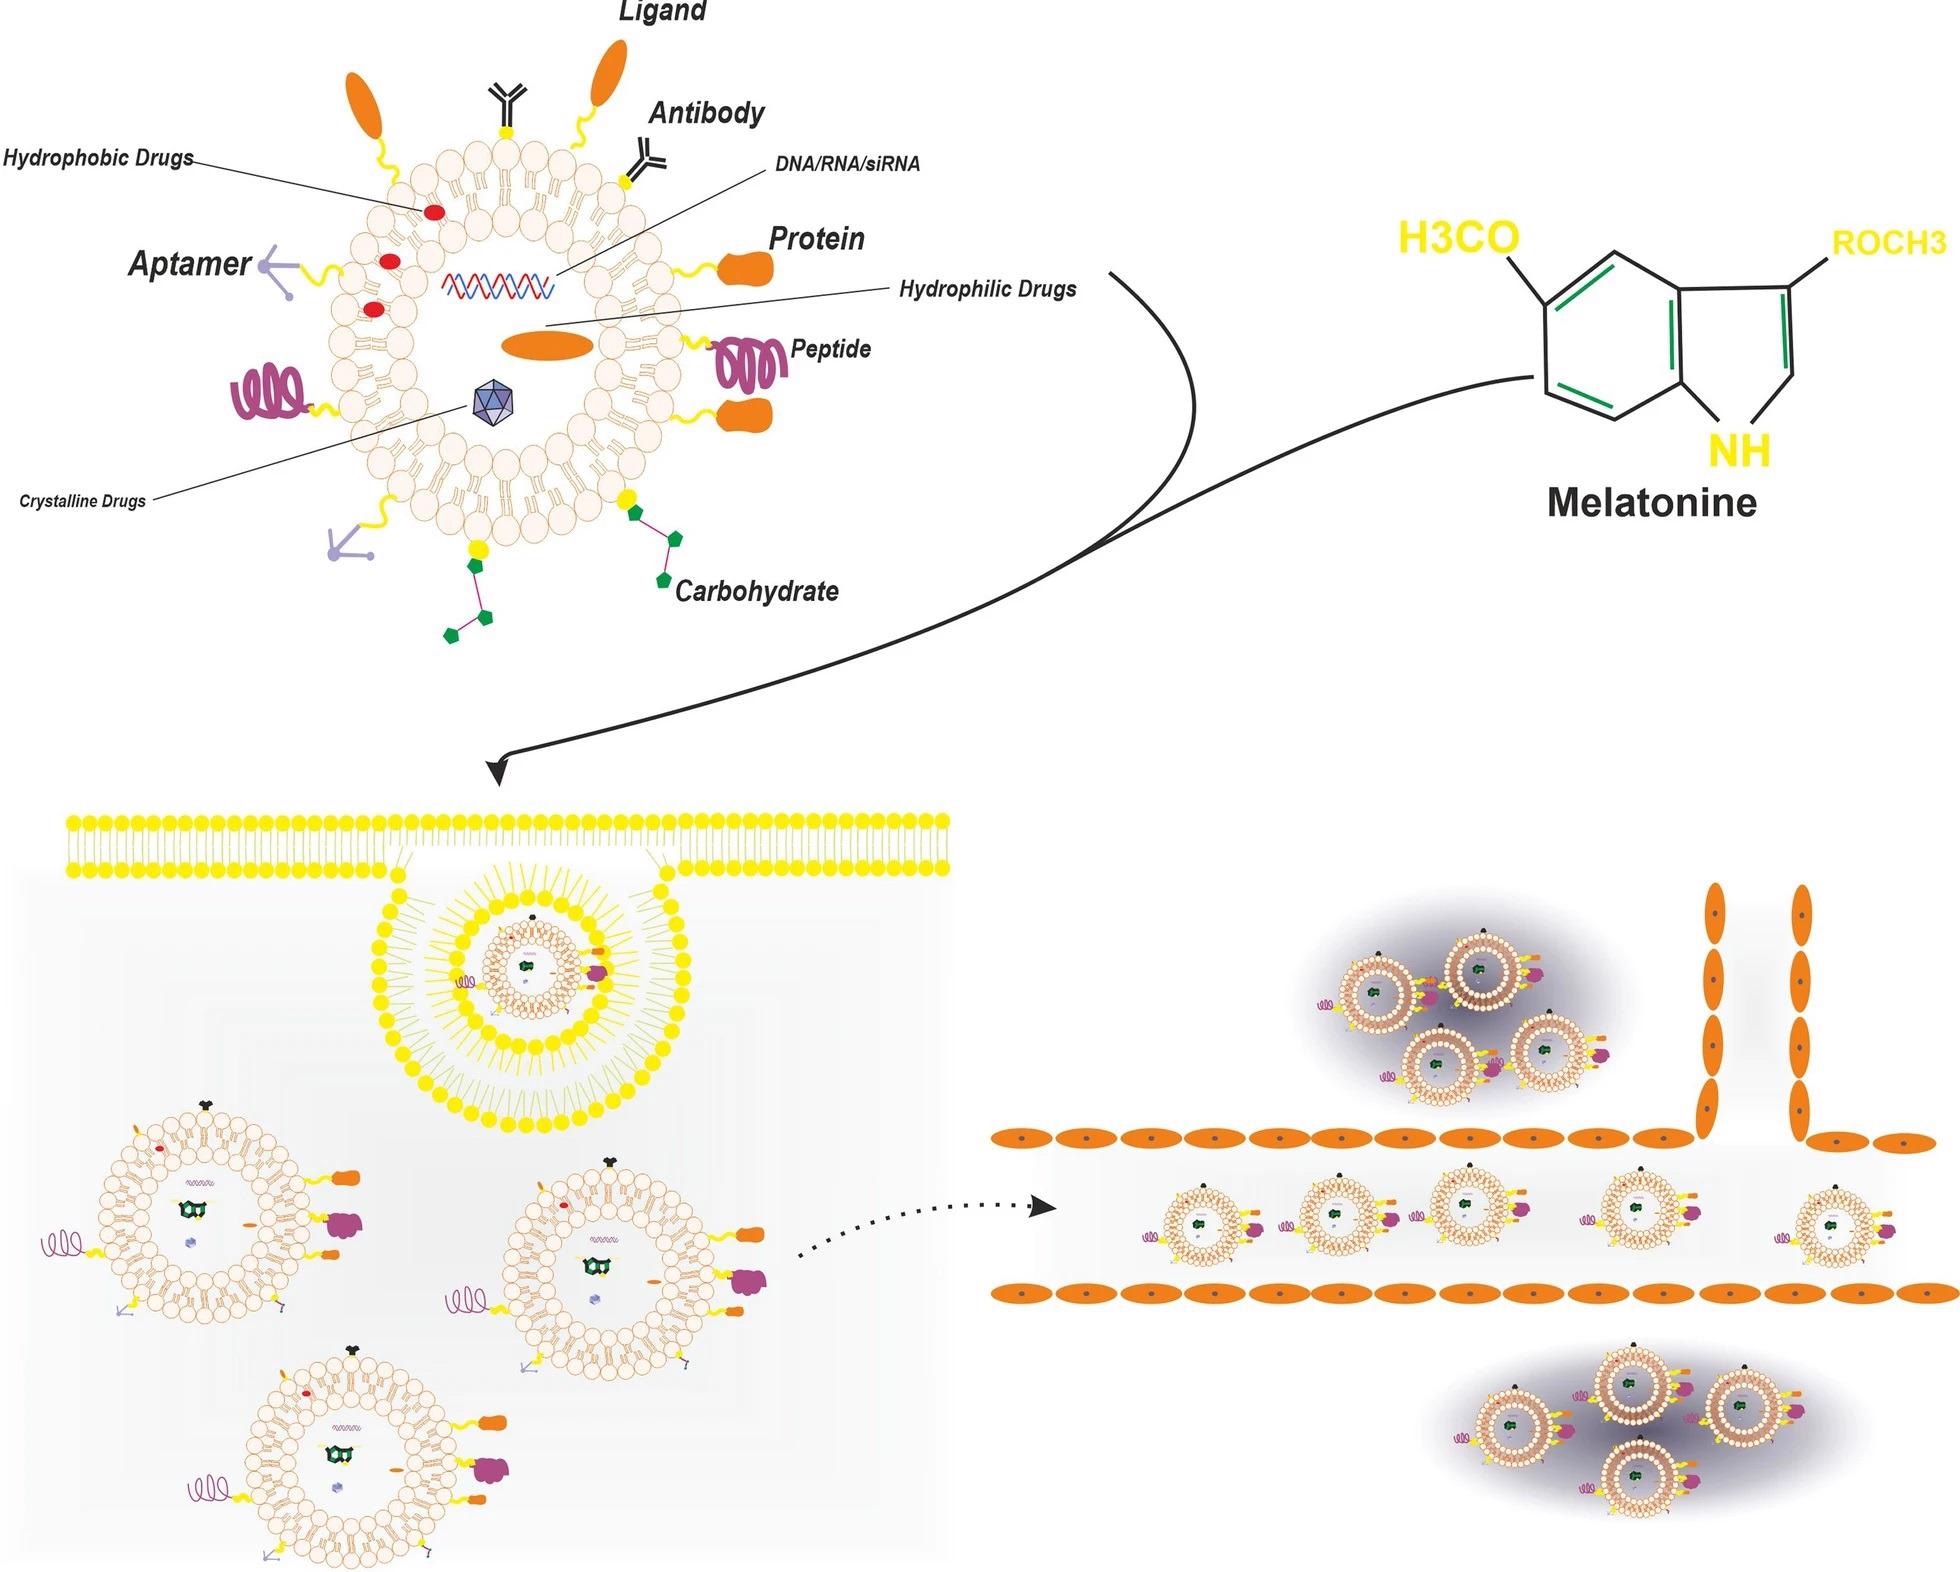 The figure shows the liposome as a melatonin delivery vehicle, the liposome increases the transdermal delivery of melatonin and also increases the distribution of melatonin to several parts of the body like the cornea as a fragile site